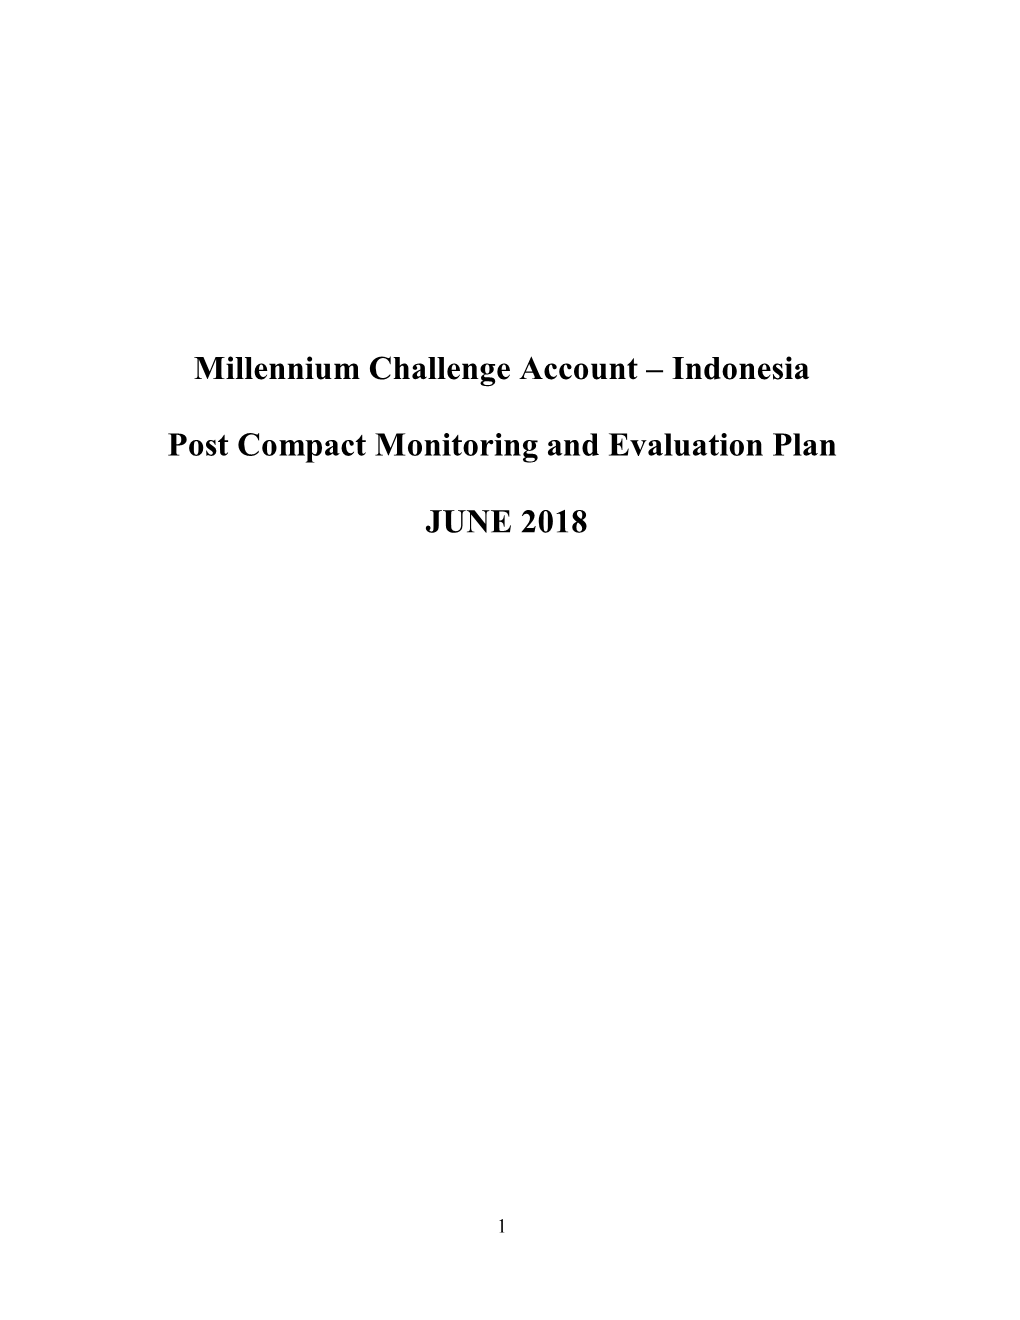 Indonesia Post Compact Monitoring and Evaluation Plan JUNE 2018